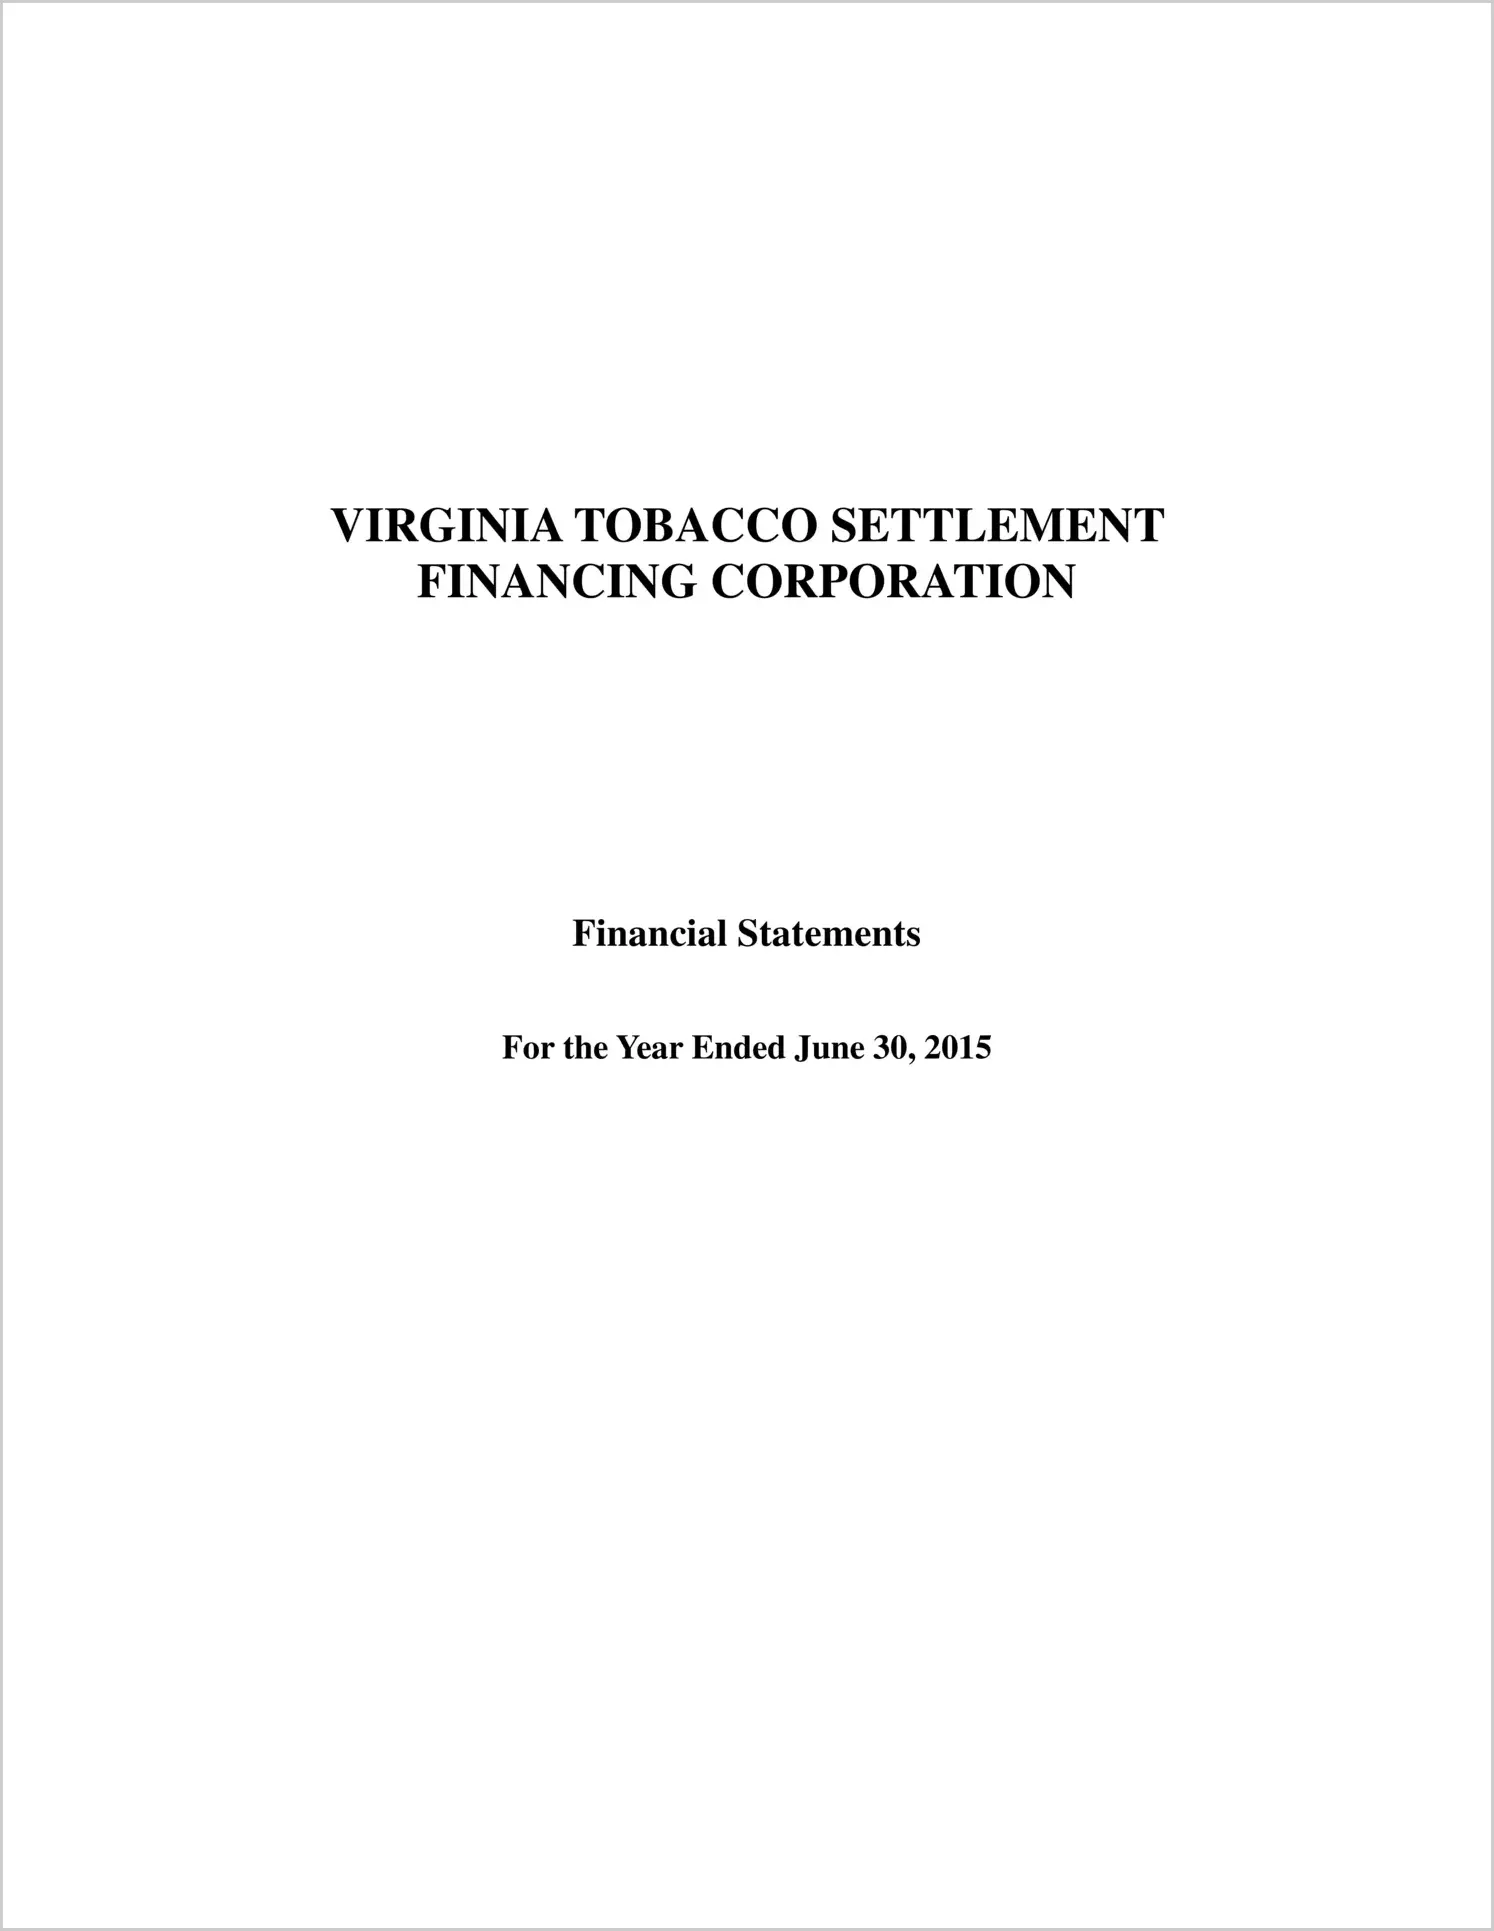 Virginia Tobacco Settlement Financing Corporation for the year ended June 30, 2015